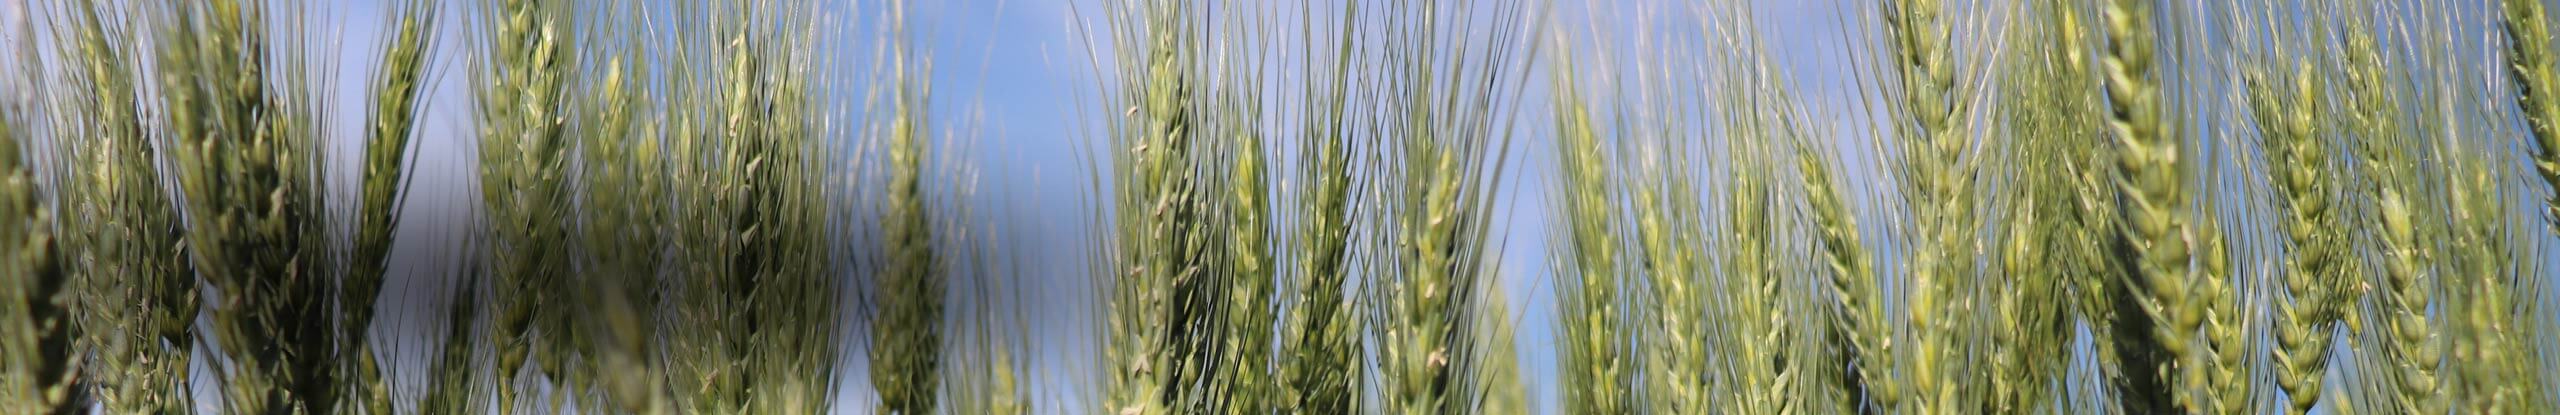 Increasing grain yield in CWRS wheat while maintaining grain protein levels and baking quality